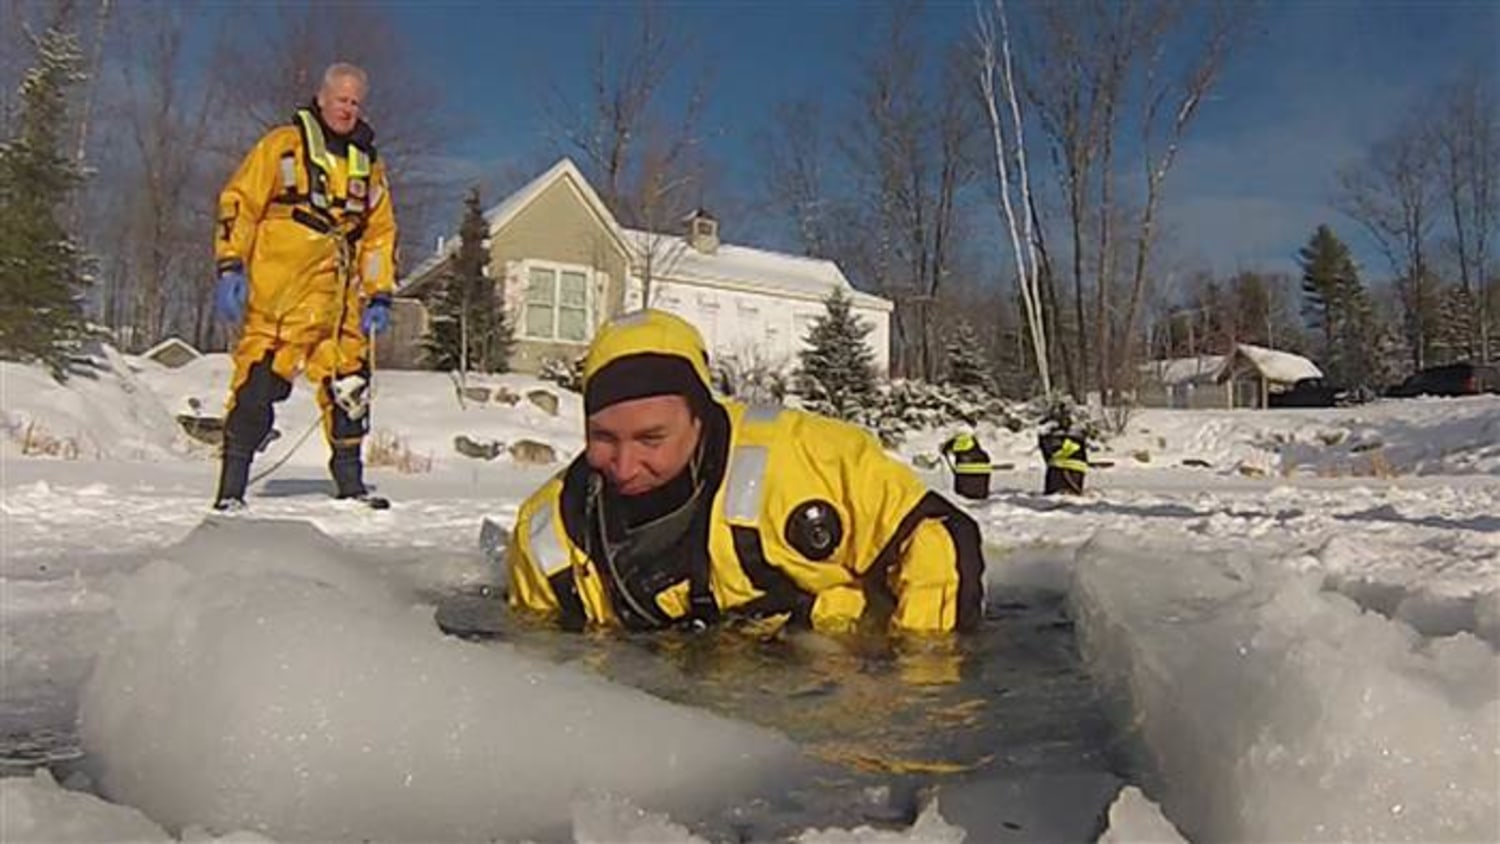 Thin ice danger: Jeff Rossen shows how to survive falling through